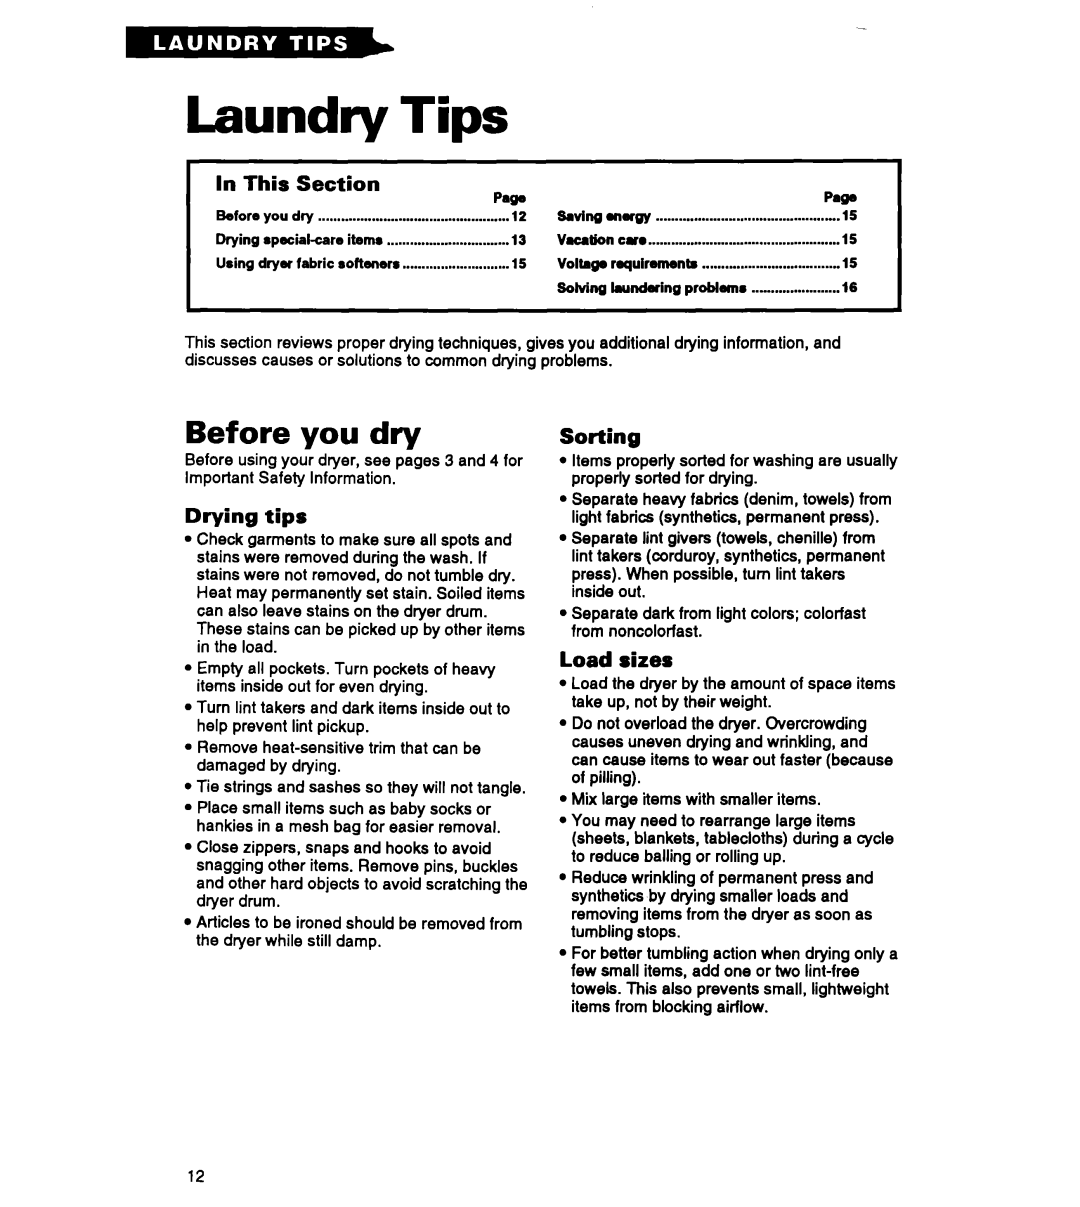 Roper RGC3422A, REP3422A, REC3422A warranty Laundry Tips, Before you dry, I In This Section, Drying tips, Sorting, Load sizes 